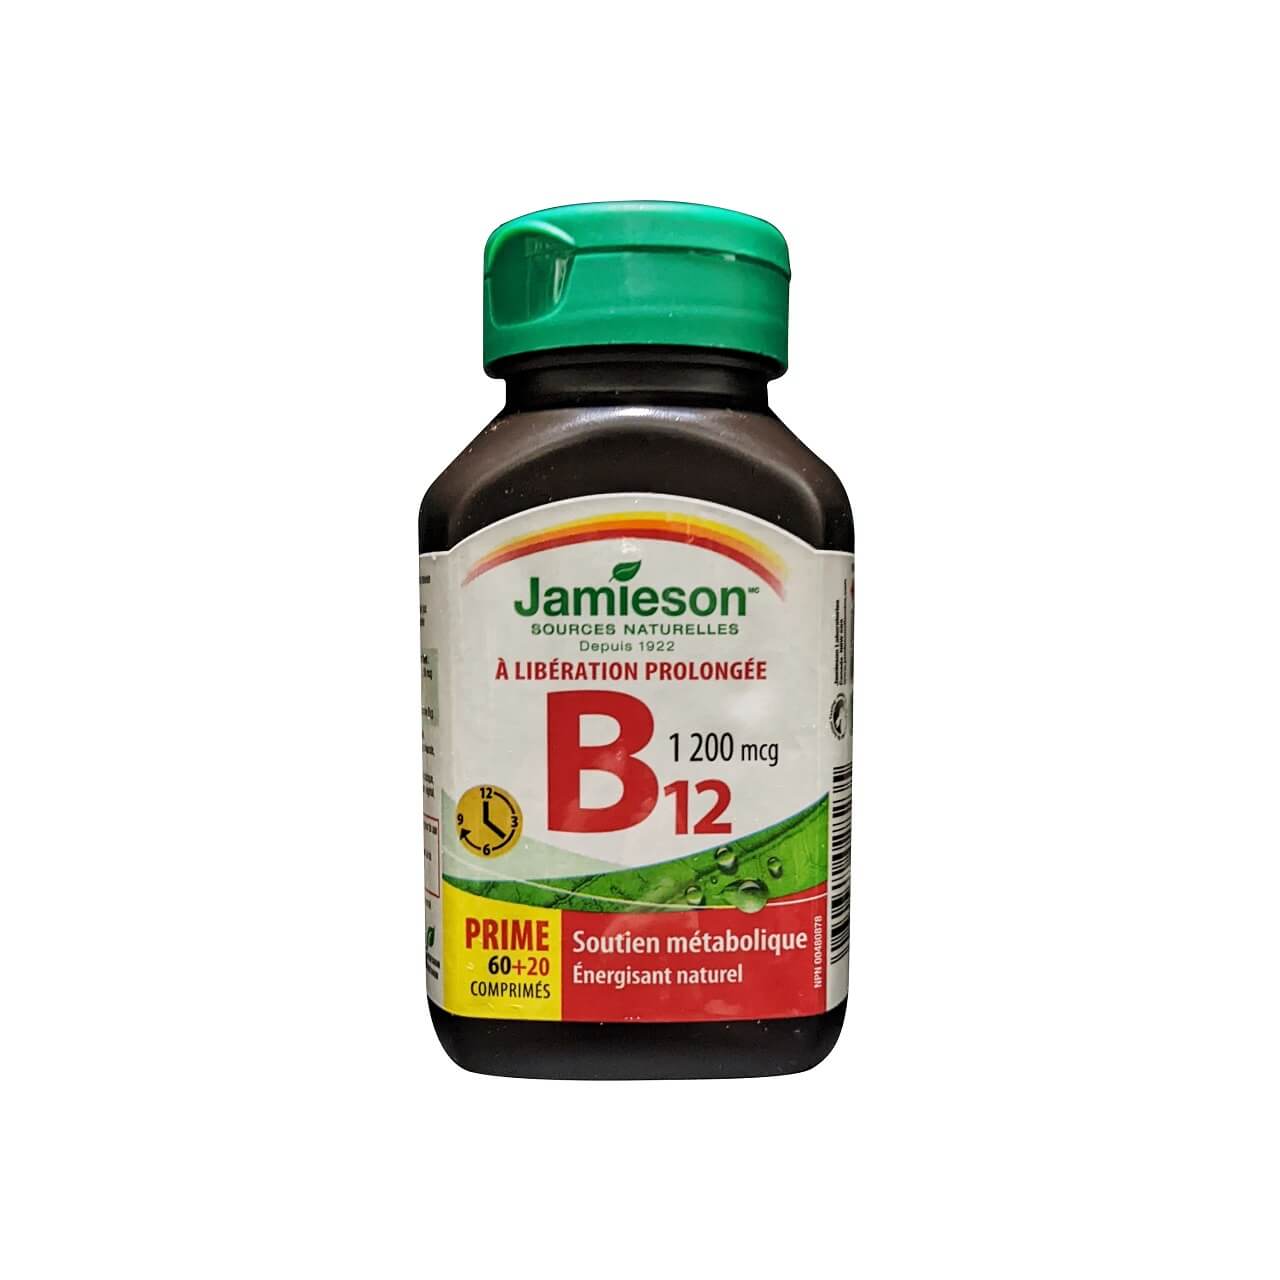 Product label for Jamieson B12 1200 mcg Timed Release (80 tablets) in French